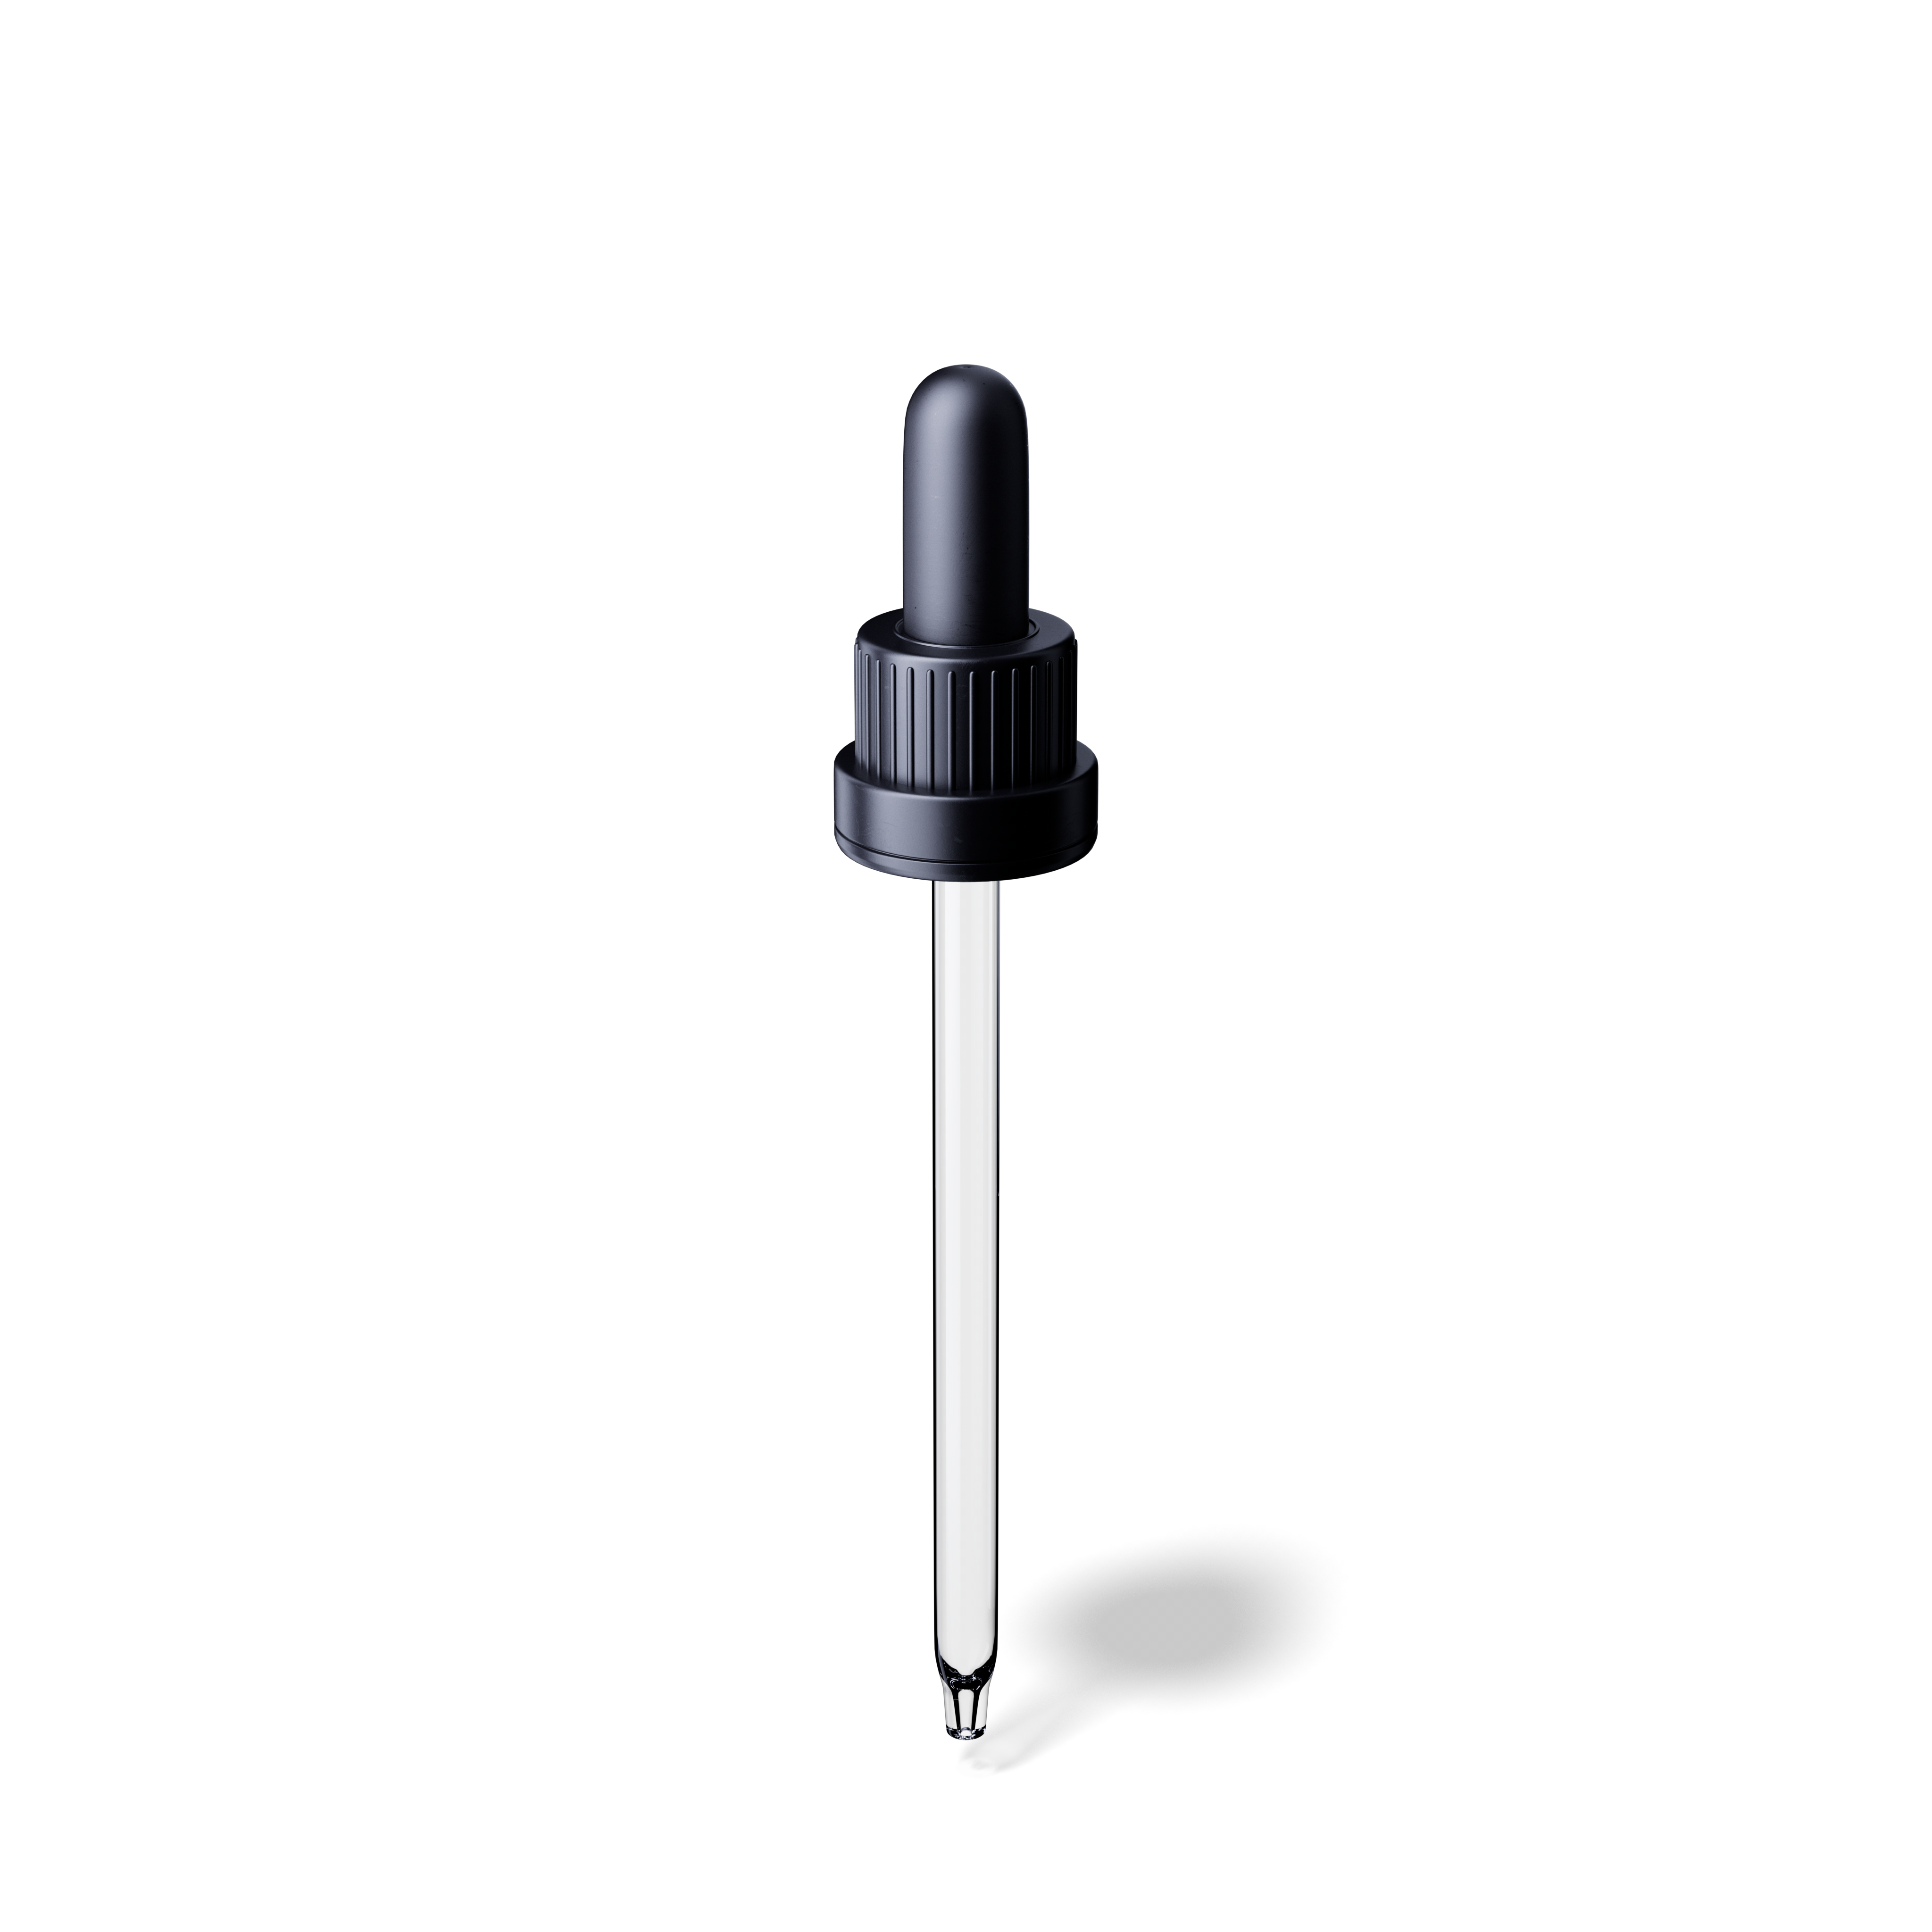 Pipette tamper evident DIN18, III, black, ribbed, bulb NBR, dose 1.0ml, conical tip (Orion 60)